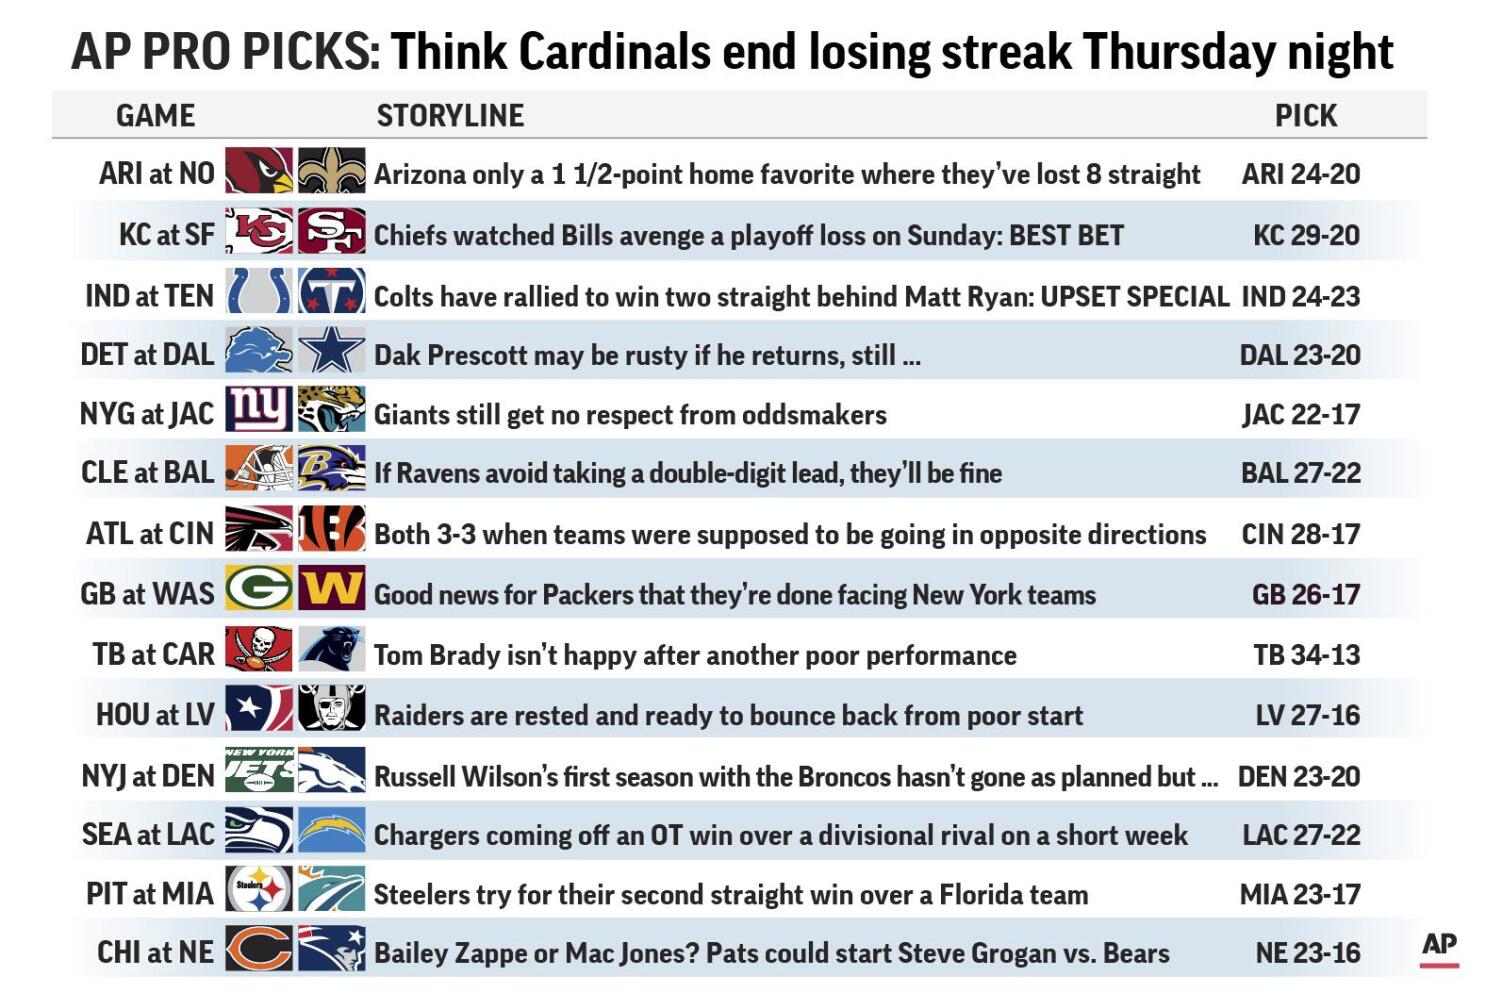 Pro Picks takes Cardinals to snap 8-game home losing skid